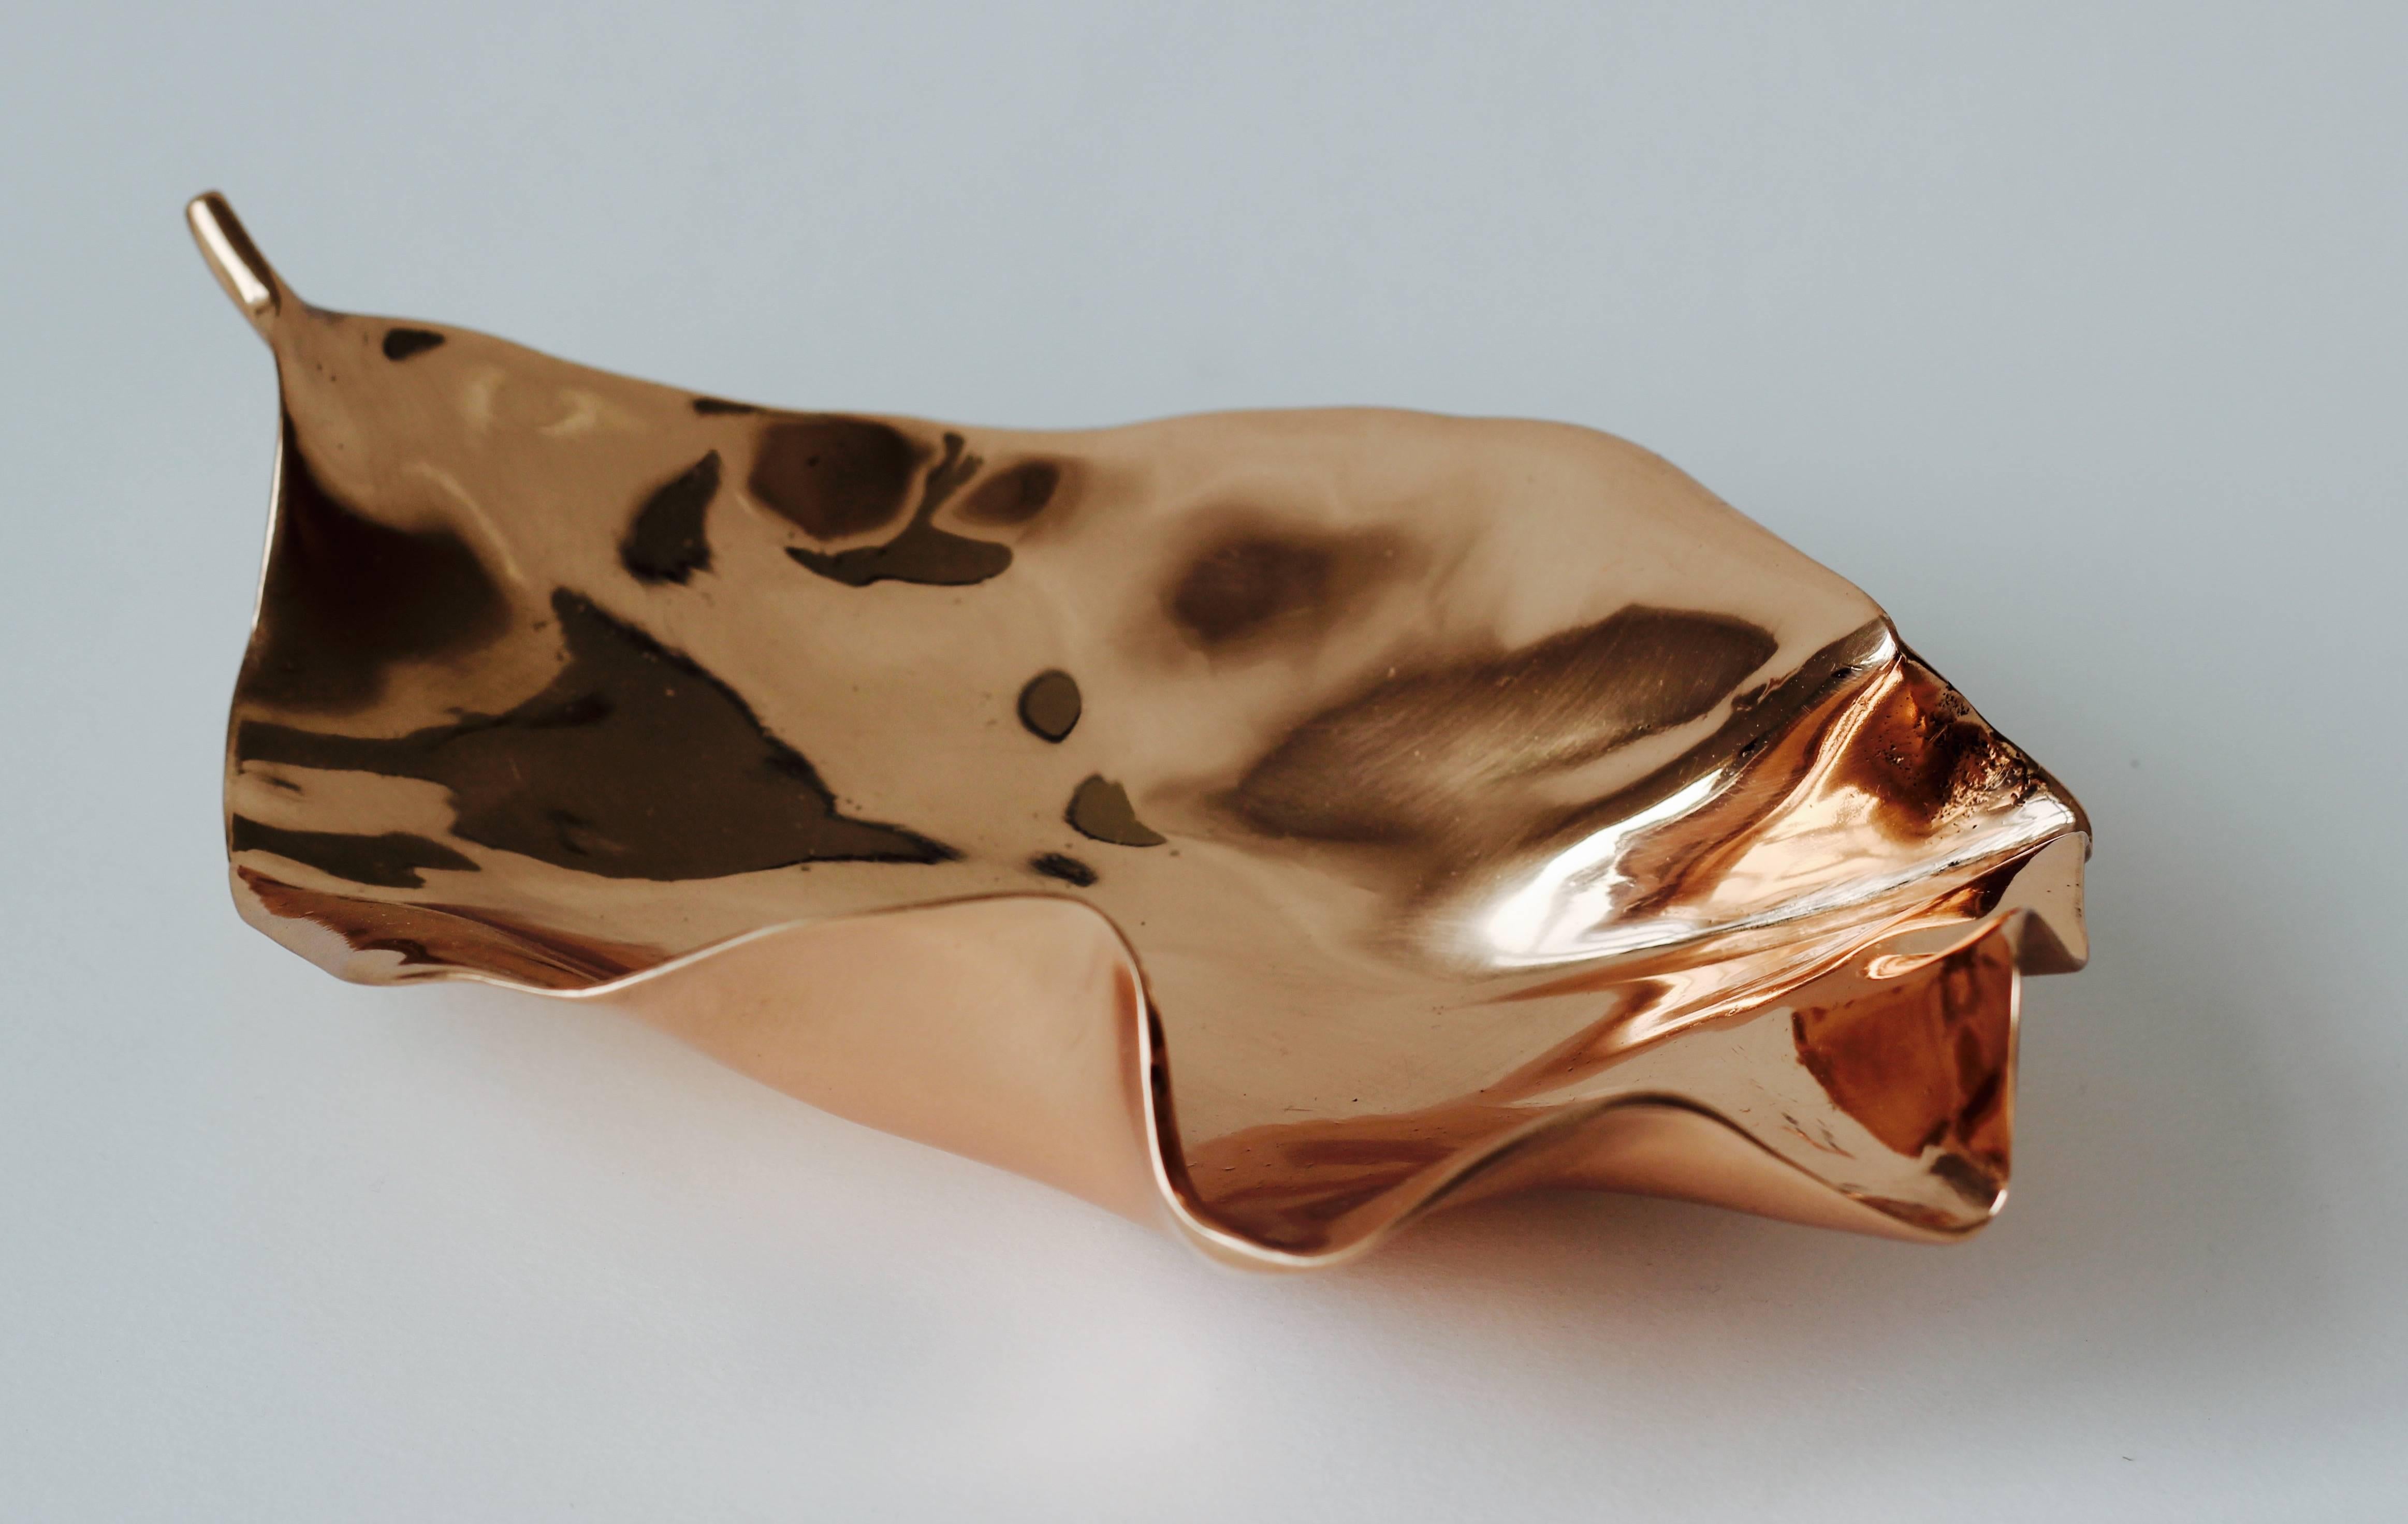 Unique and exquisite handmade cast bronze leaf in a polished bronze finish.